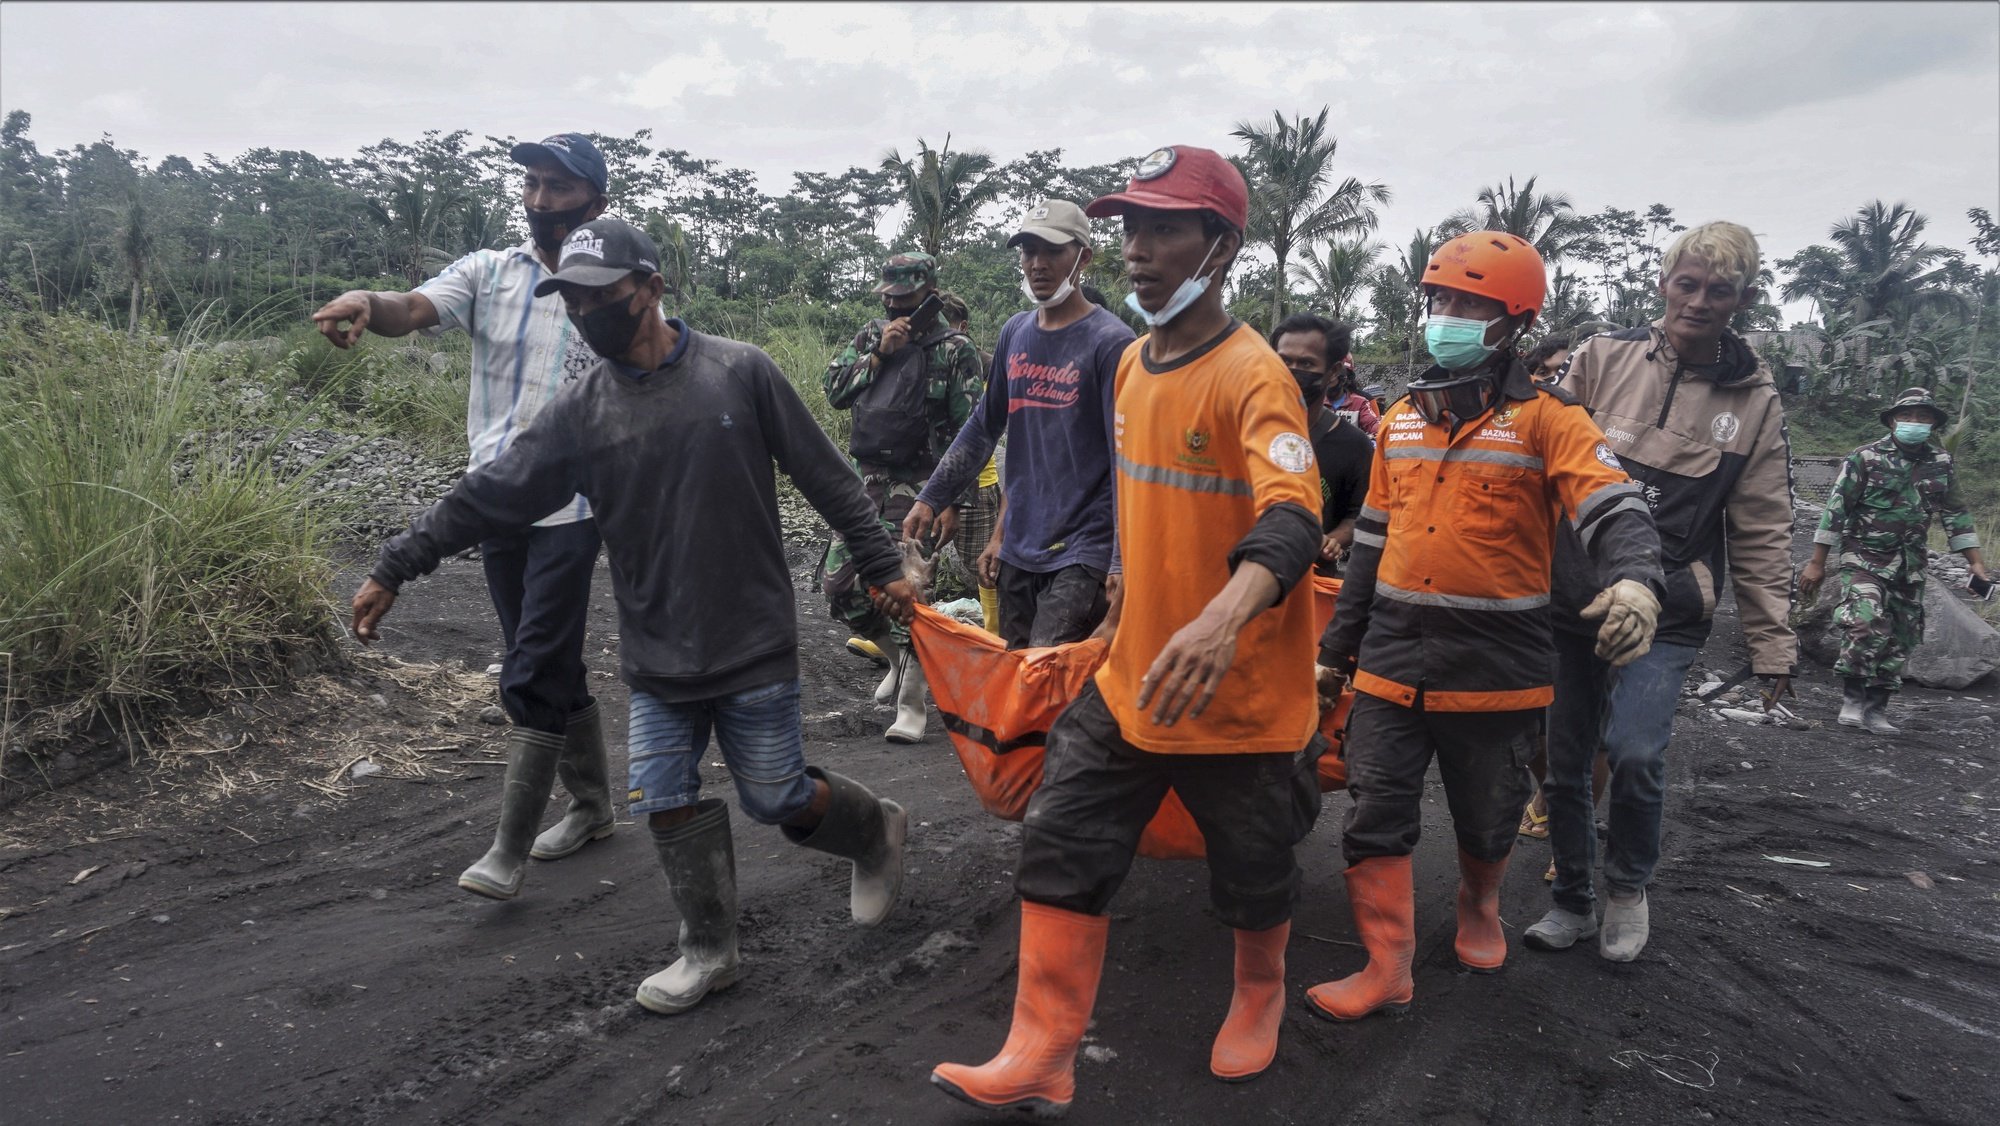 epa09622890 Rescuers carry the body of a victim of the Mount Semeru eruption in a village in Lumajang, East Java, Indonesia, 05 December 2021. The volcano erupted on 04 December leaving a number of people killed and missing.  EPA/AMMAR